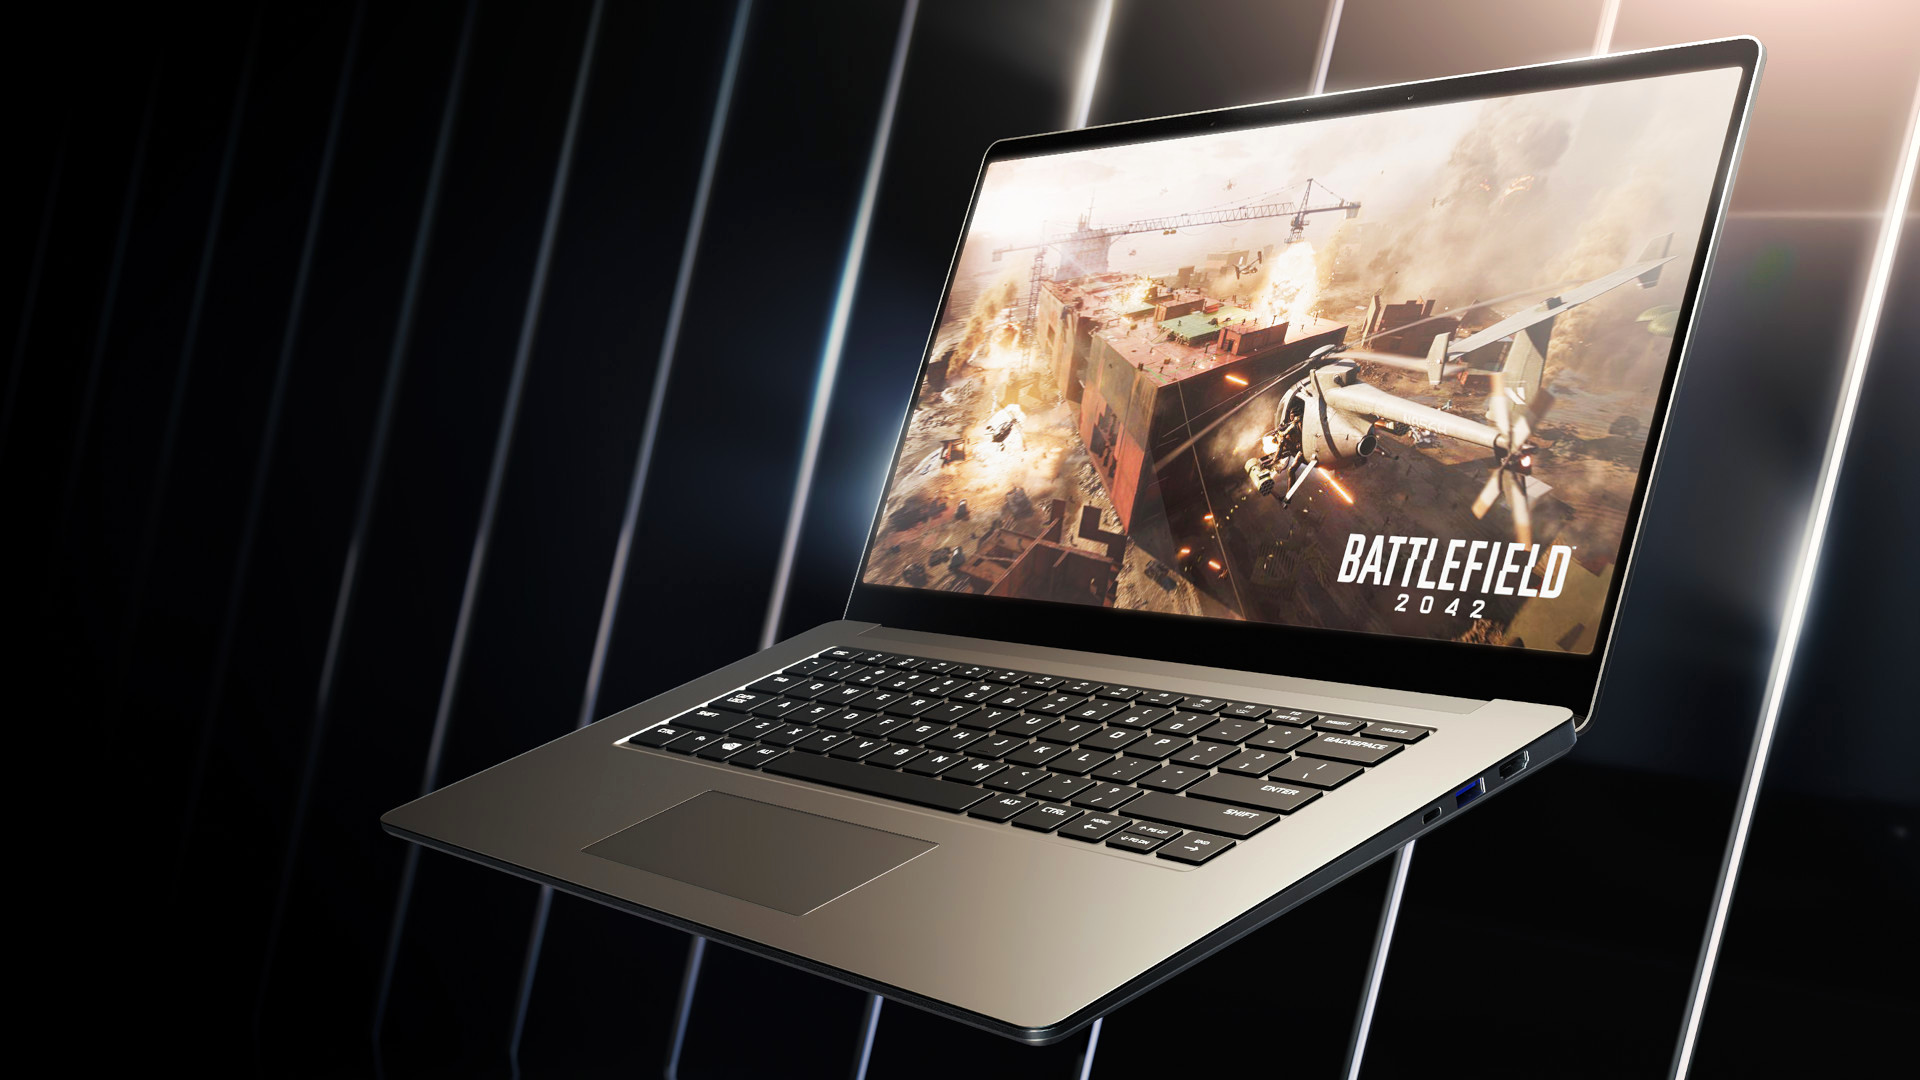 Nvidia RTX 4000 GPUs might draw more power in gaming laptops and PCs